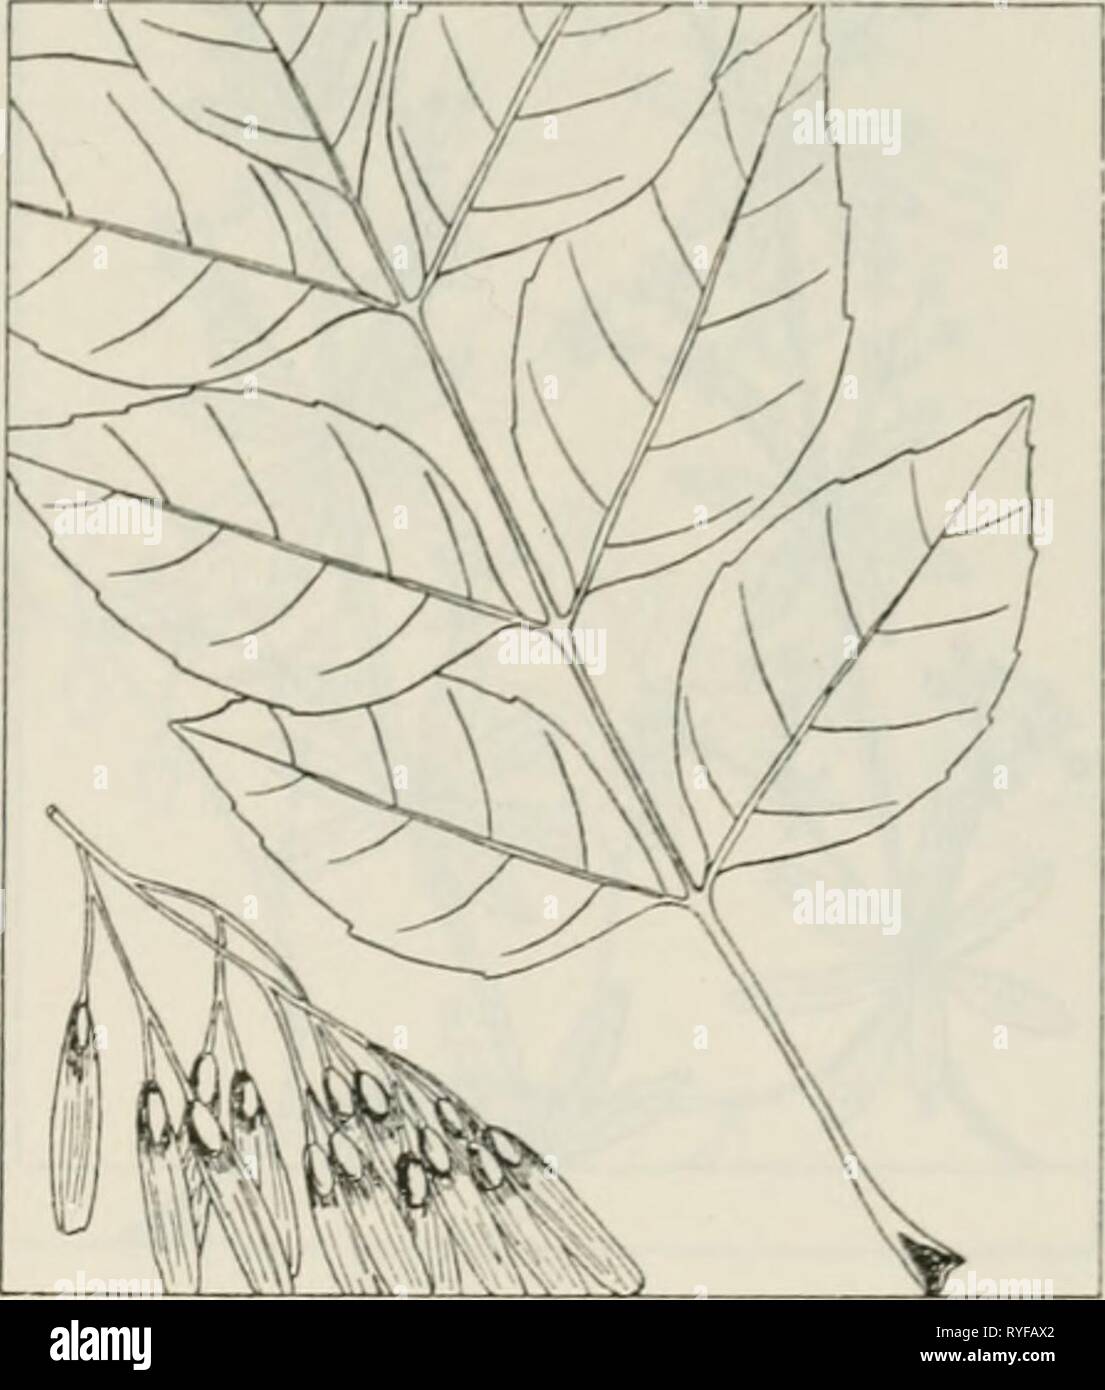 The drug plants of Illinois  drugplantsofilli44teho Year: 1951  Tehon THE DRUG PLANTS OF ILLINOIS 57 FRAXINUS AMERICANA L. White ash. Oleaceae.—A moderate to large tree 60 to 80 feet tall; bark of the trunk gray to dark brown, furrowed, thick; branchlets gray to brown; leaves large, odd-pinnately compound, opposite; leaf- lets thin, dark green, pointed, ovate, den- tate, 5 to 9, usually 7, in number; flowers inconspicuous; fruit an oblong, narrow 'key' 1 to 2 inches long, with a long, membranous wing. The inner bark of trunk and root col- lected. Common in woods on uplands, bottomlands, and st Stock Photo